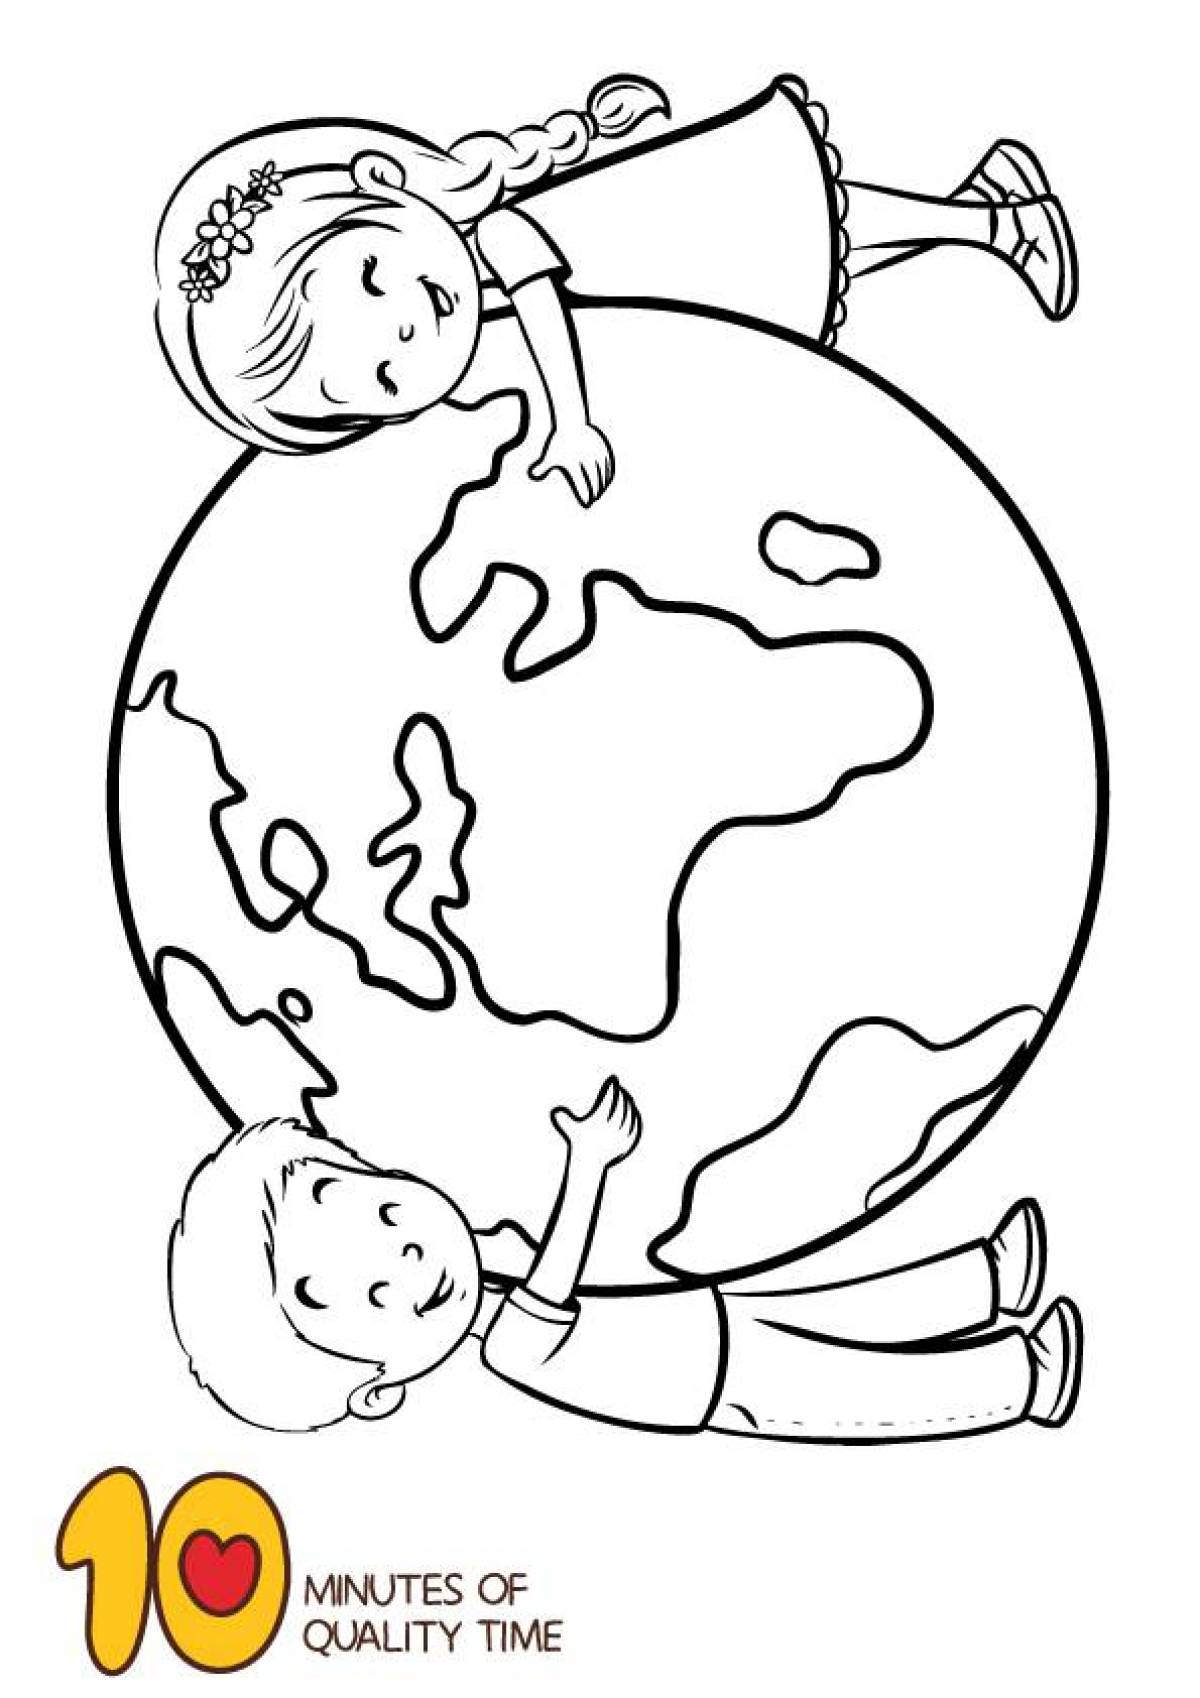 Shining planet earth coloring book for kids